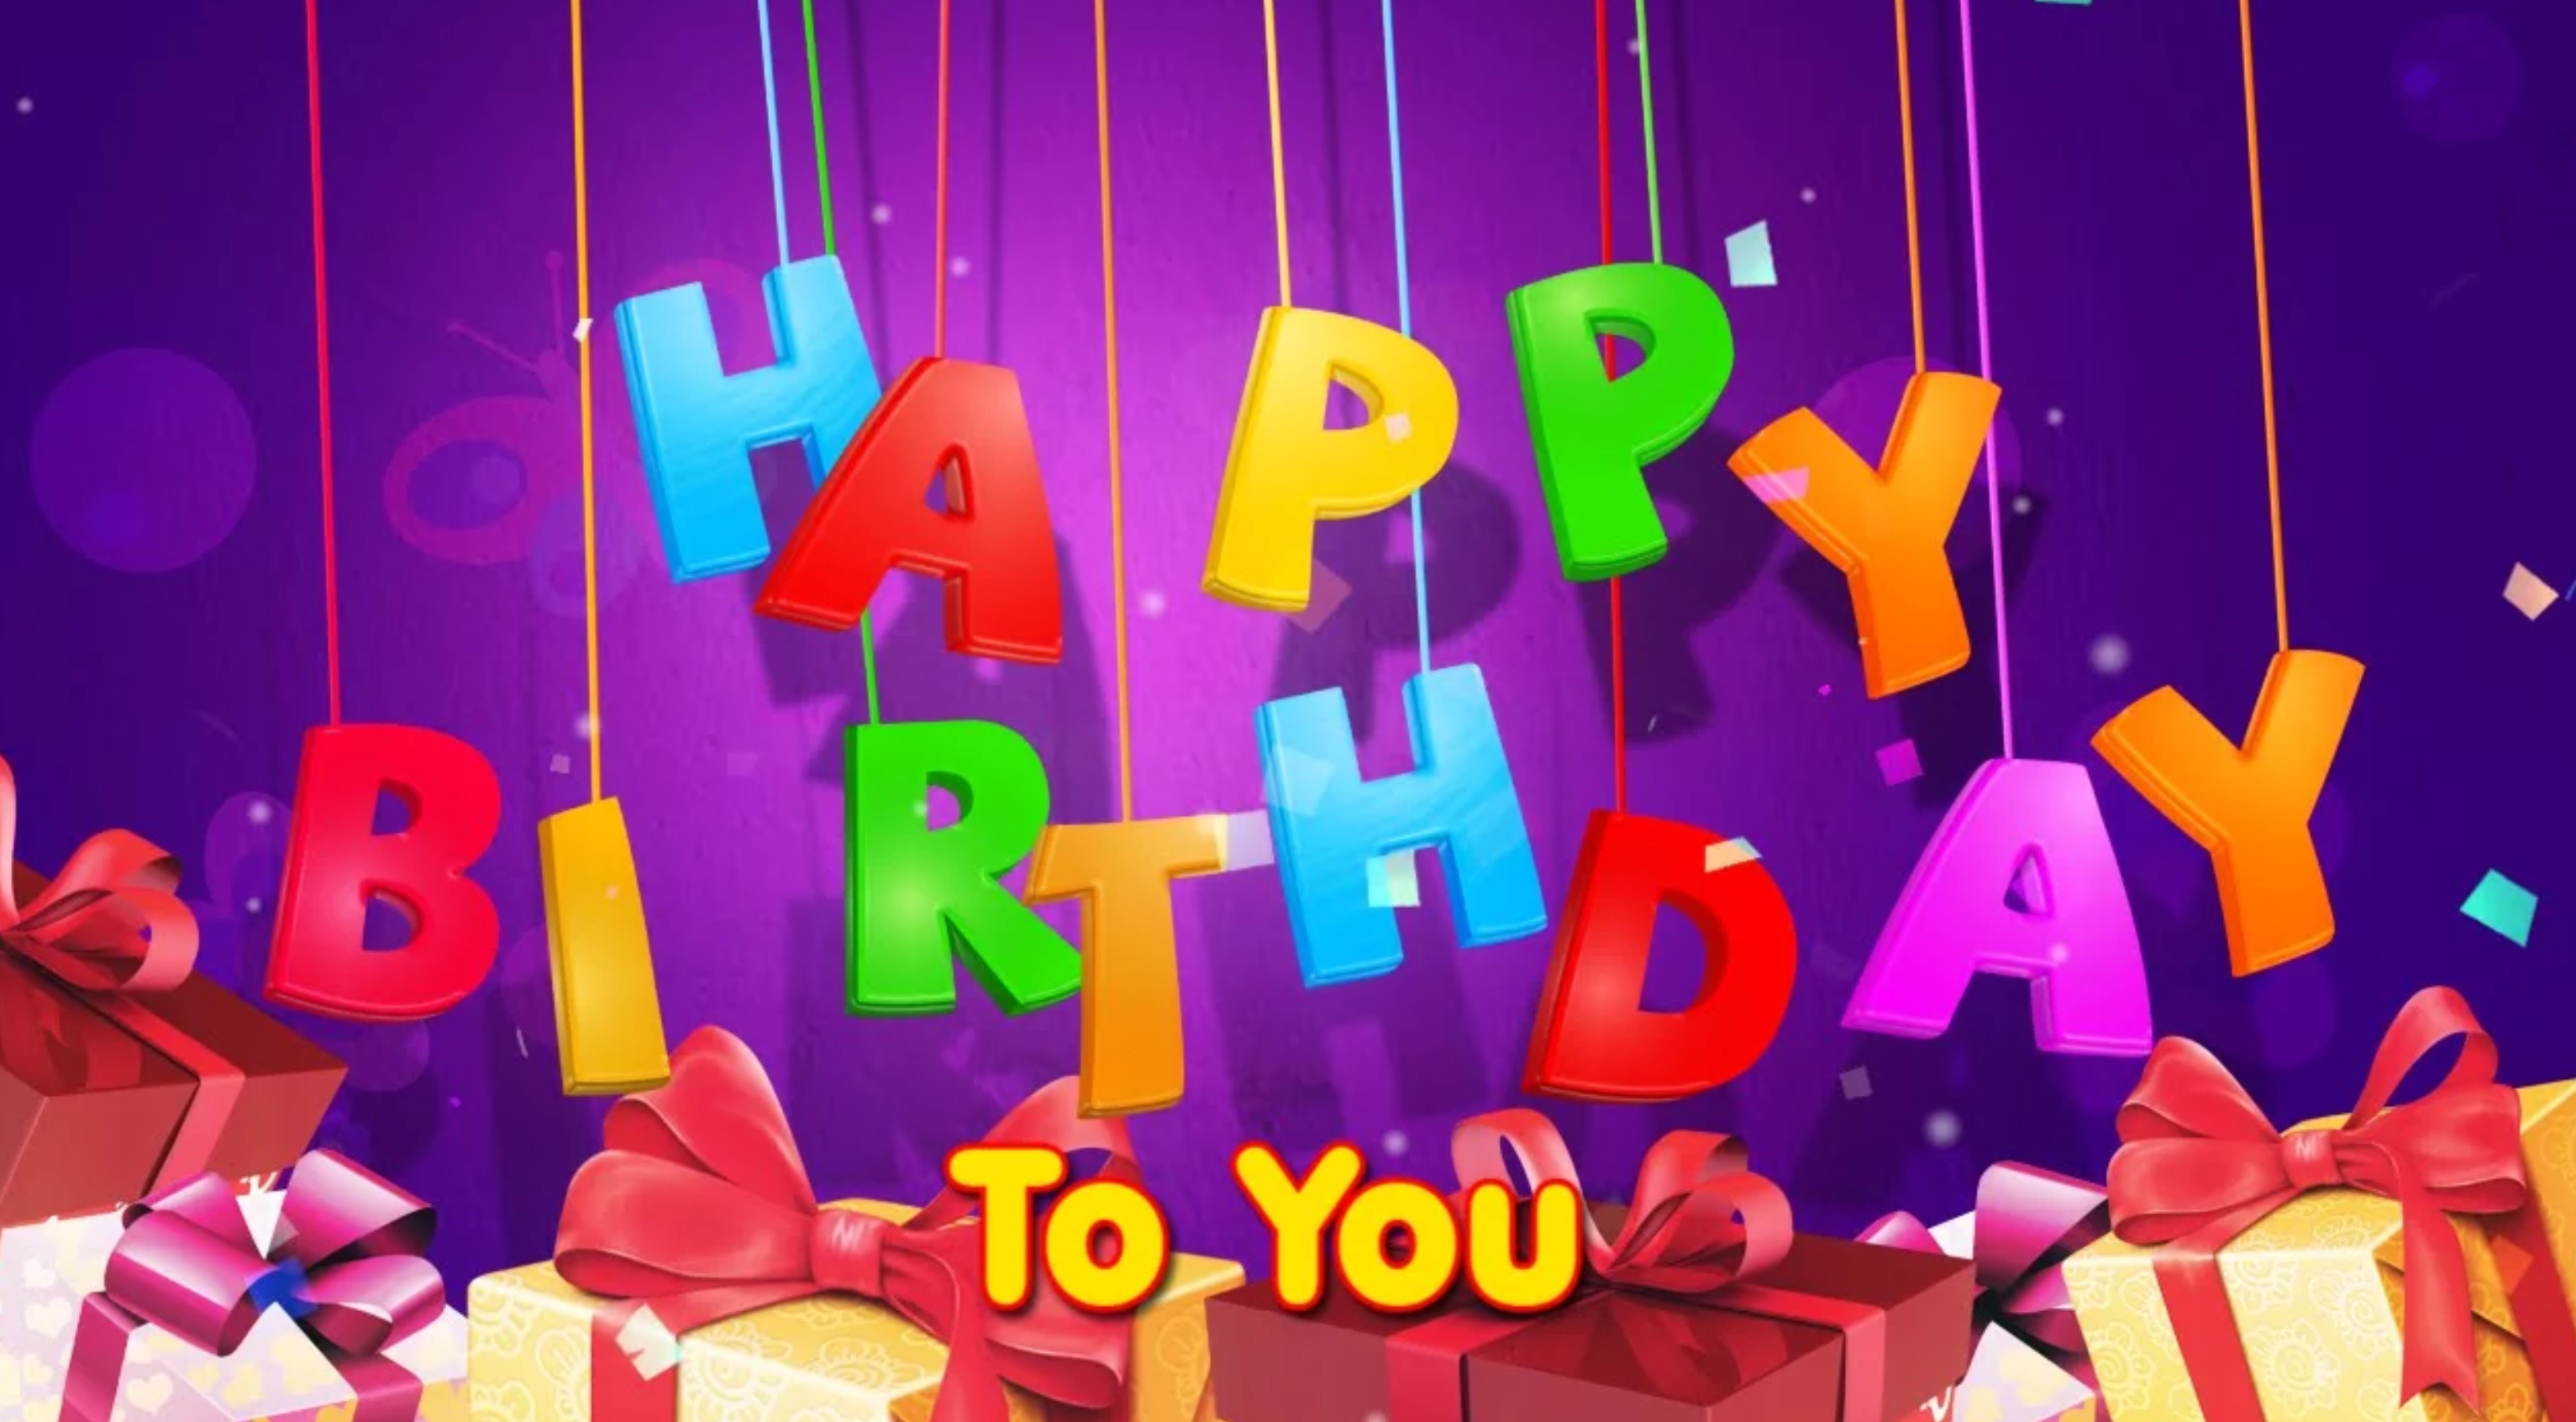 100 Self Birthday Wishes Funny Messages And Prayers 21 Update Current School News